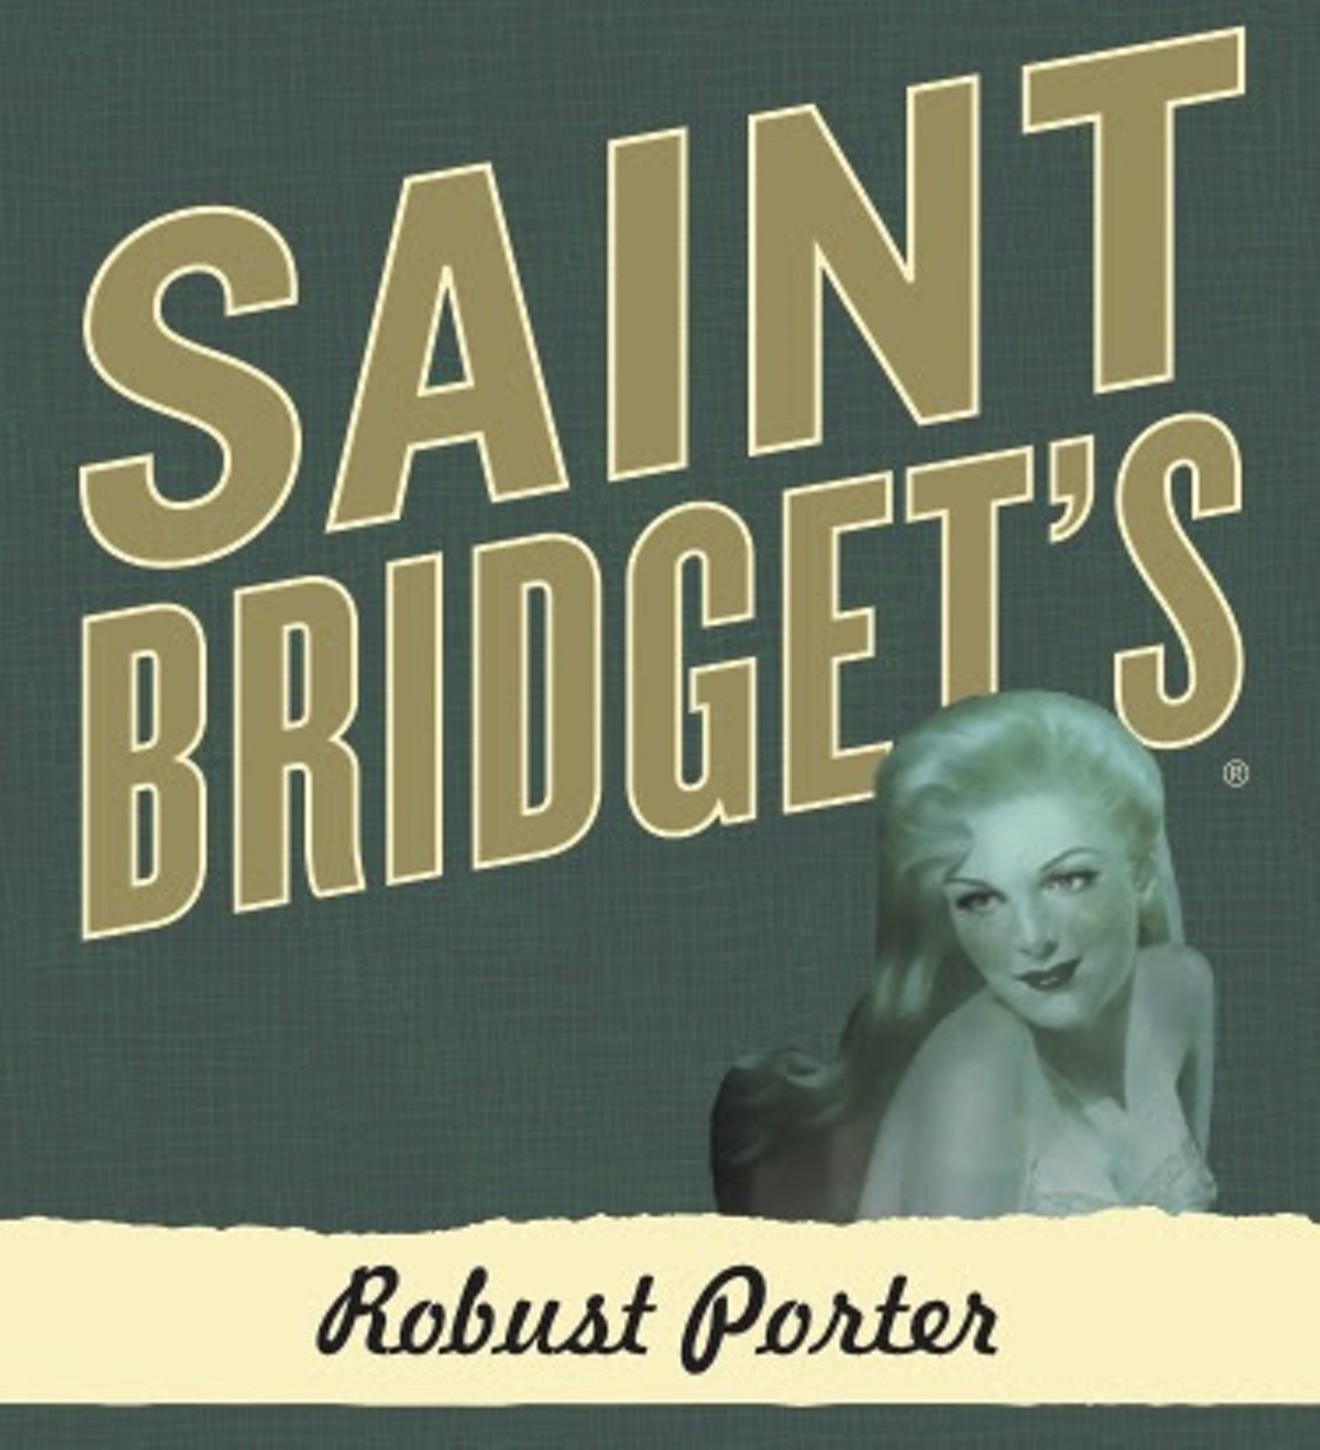 Saint Bridget's is back, but only in limited quantities.